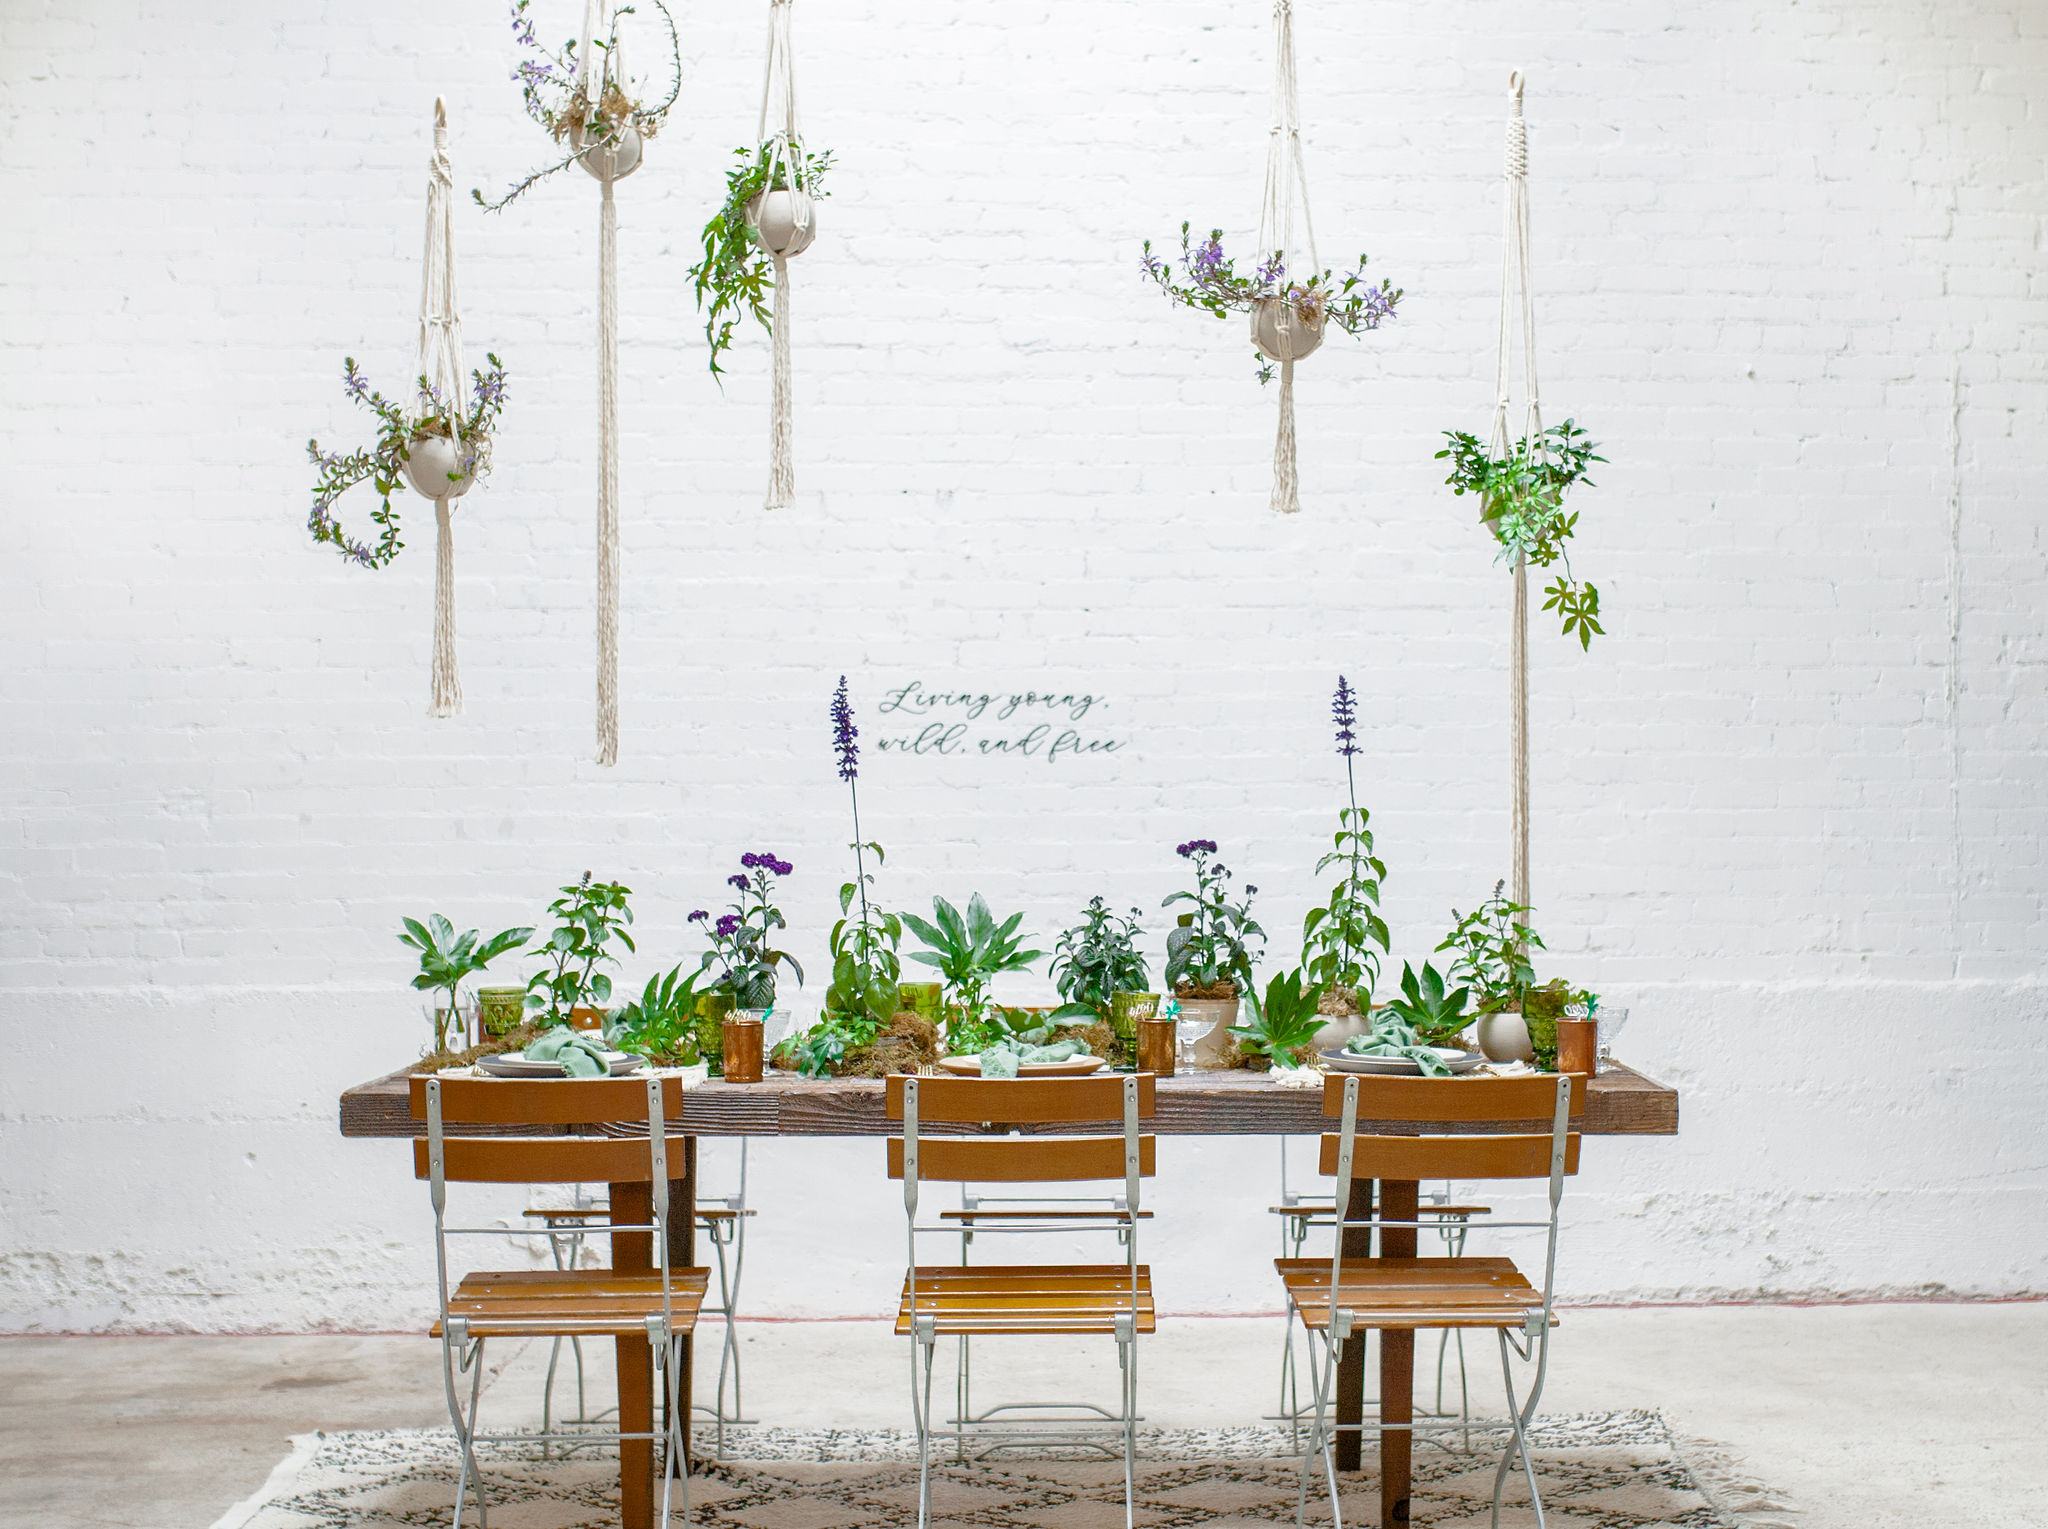 4/20 Tablescape – Living Young, Wild & Free